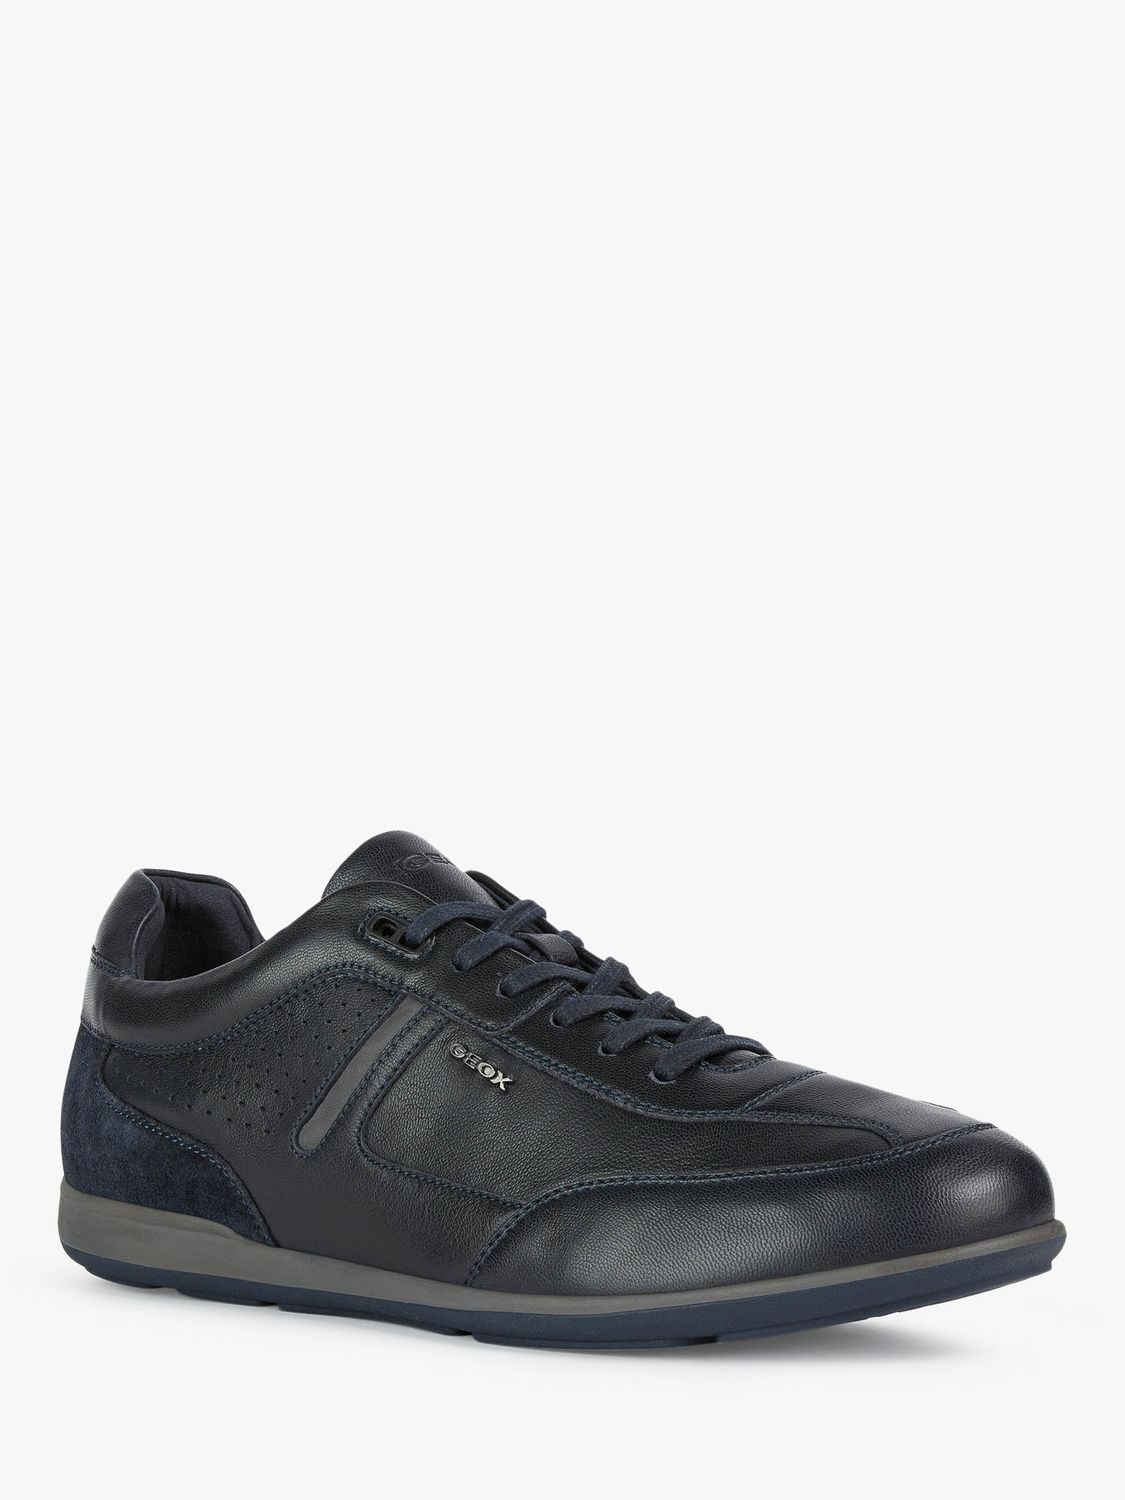 Geox Ionio Men's Leather Lace Up Trainers, Navy at John Lewis & Partners